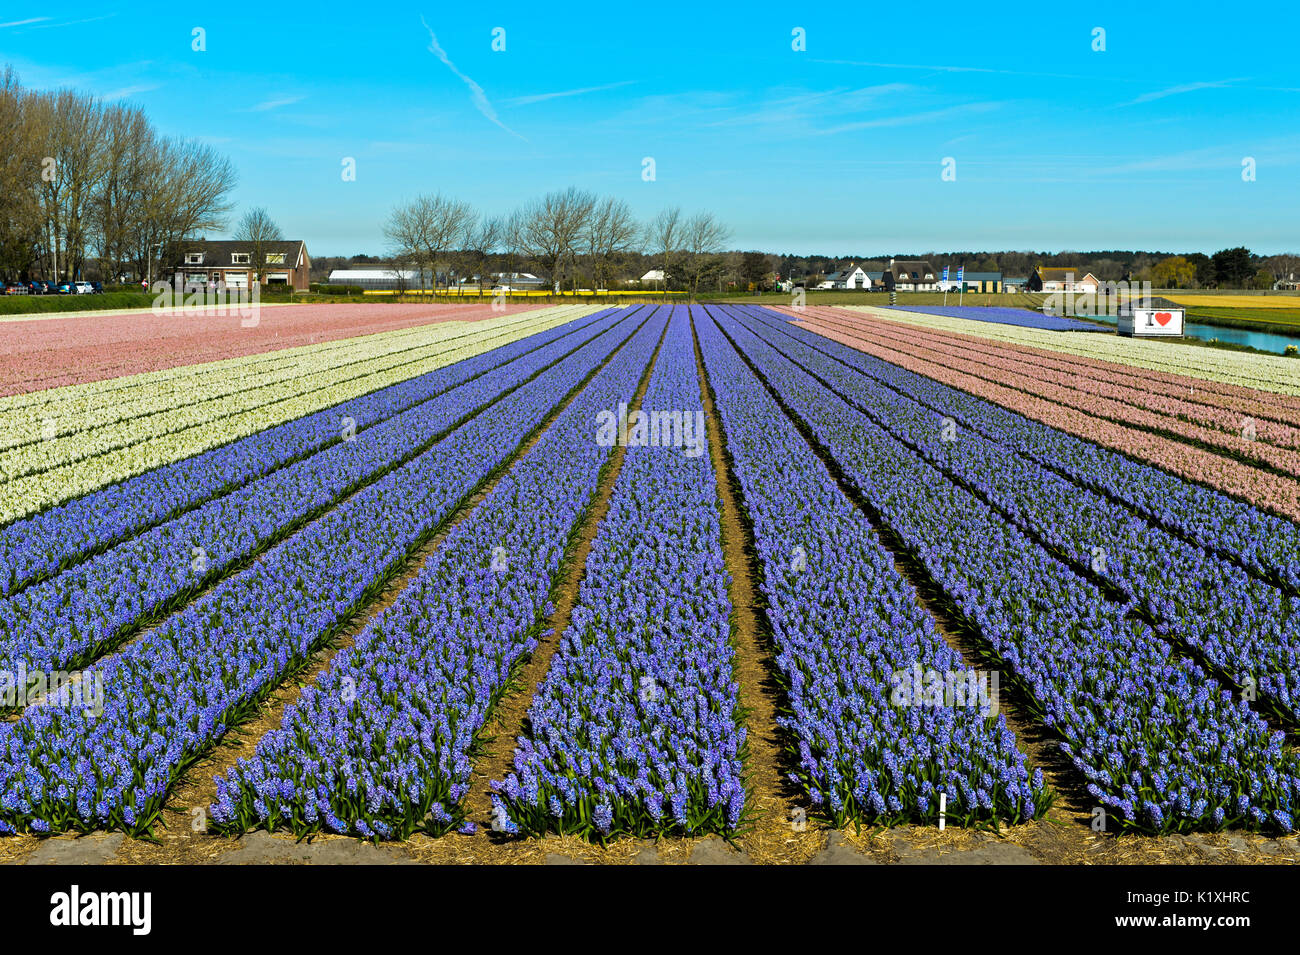 Cultivation of blue hyacinths for the production of flower bulbs in the Bollenstreek area, Noordwijkerhout, Netherlands Stock Photo